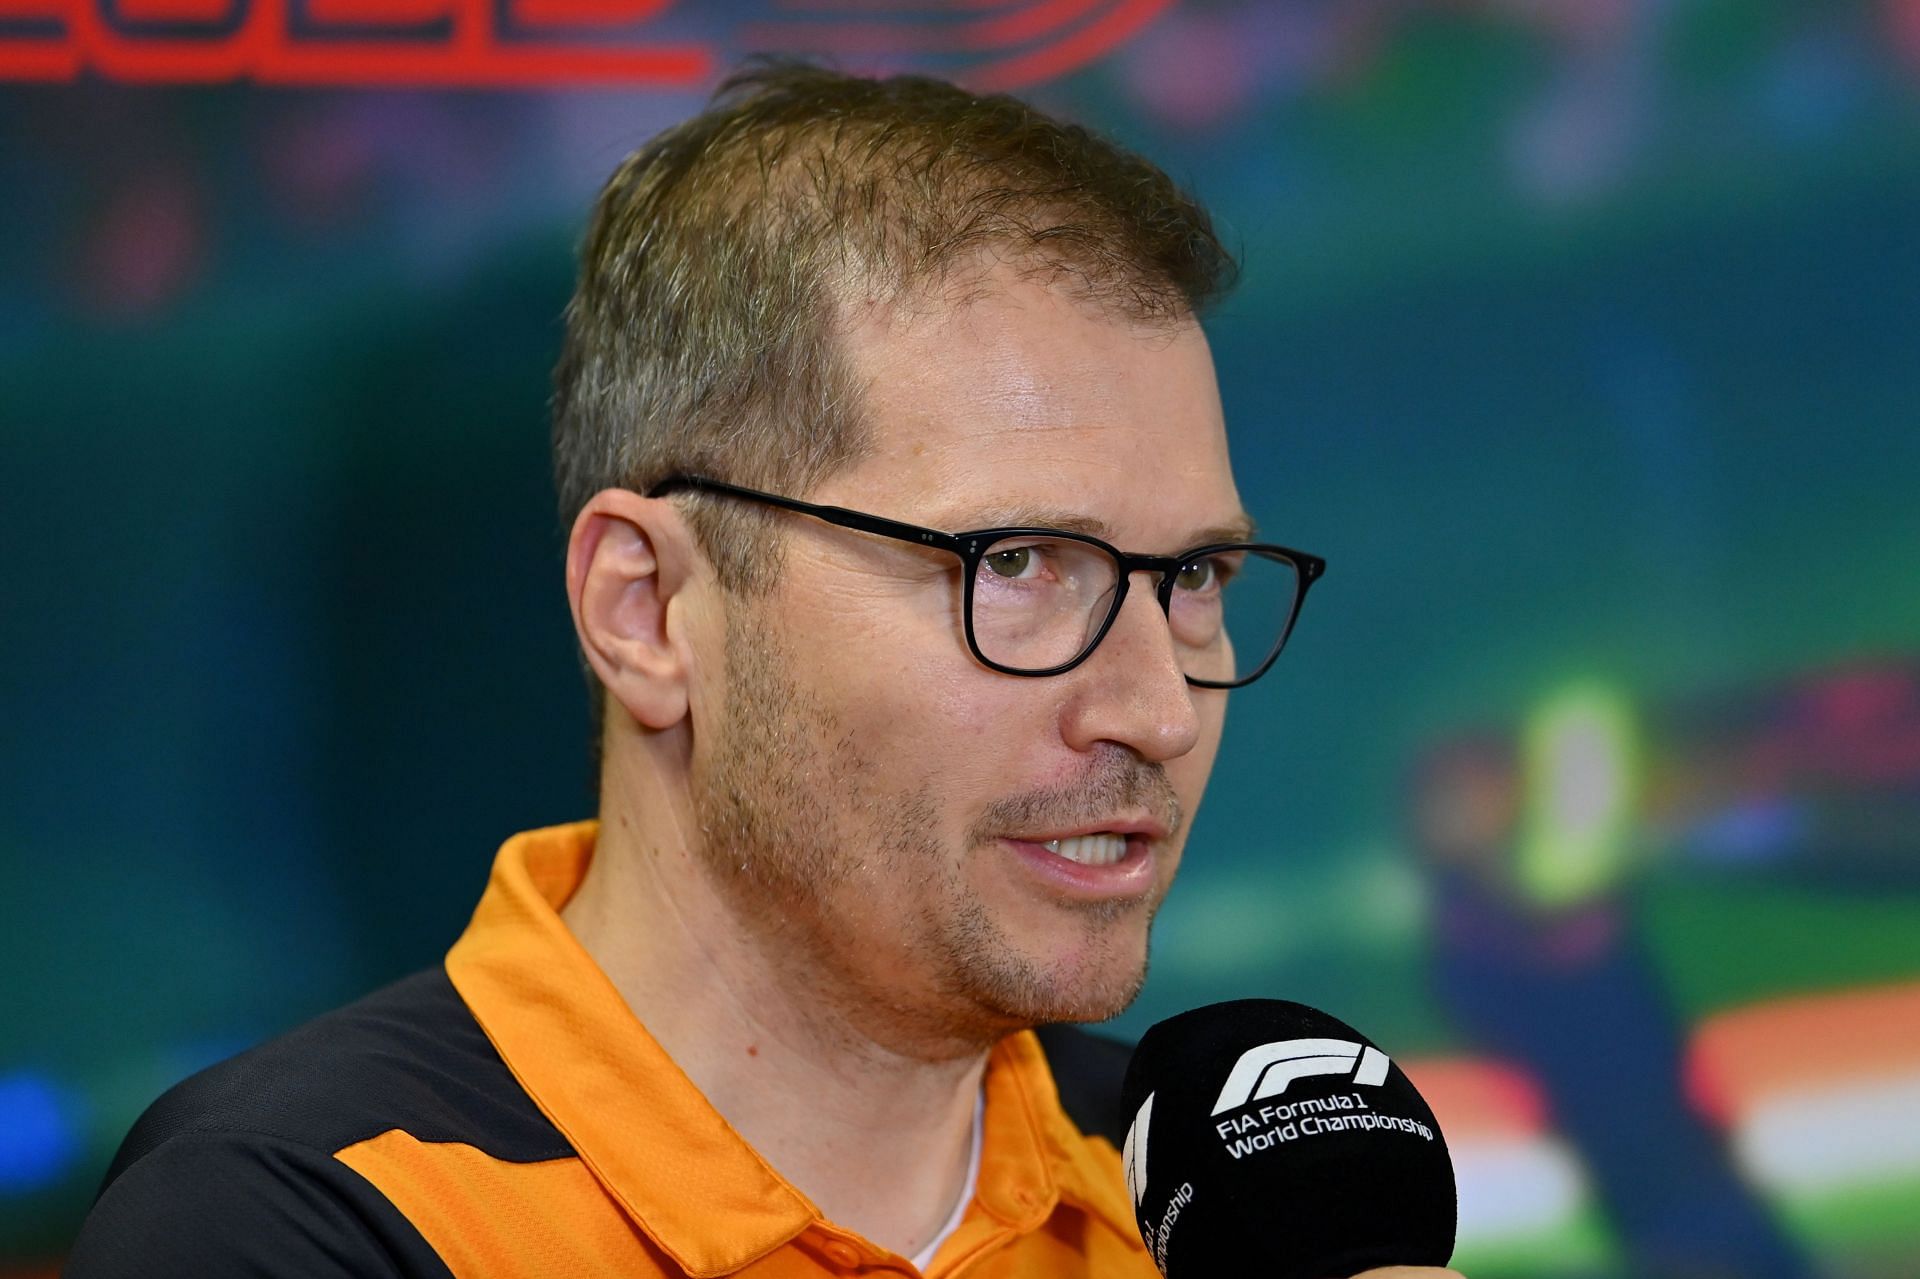 McLaren team principal Andreas Seidl speaks to the media during the 2022 F1 Hungarian GP weekend (Photo by Dan Mullan/Getty Images)